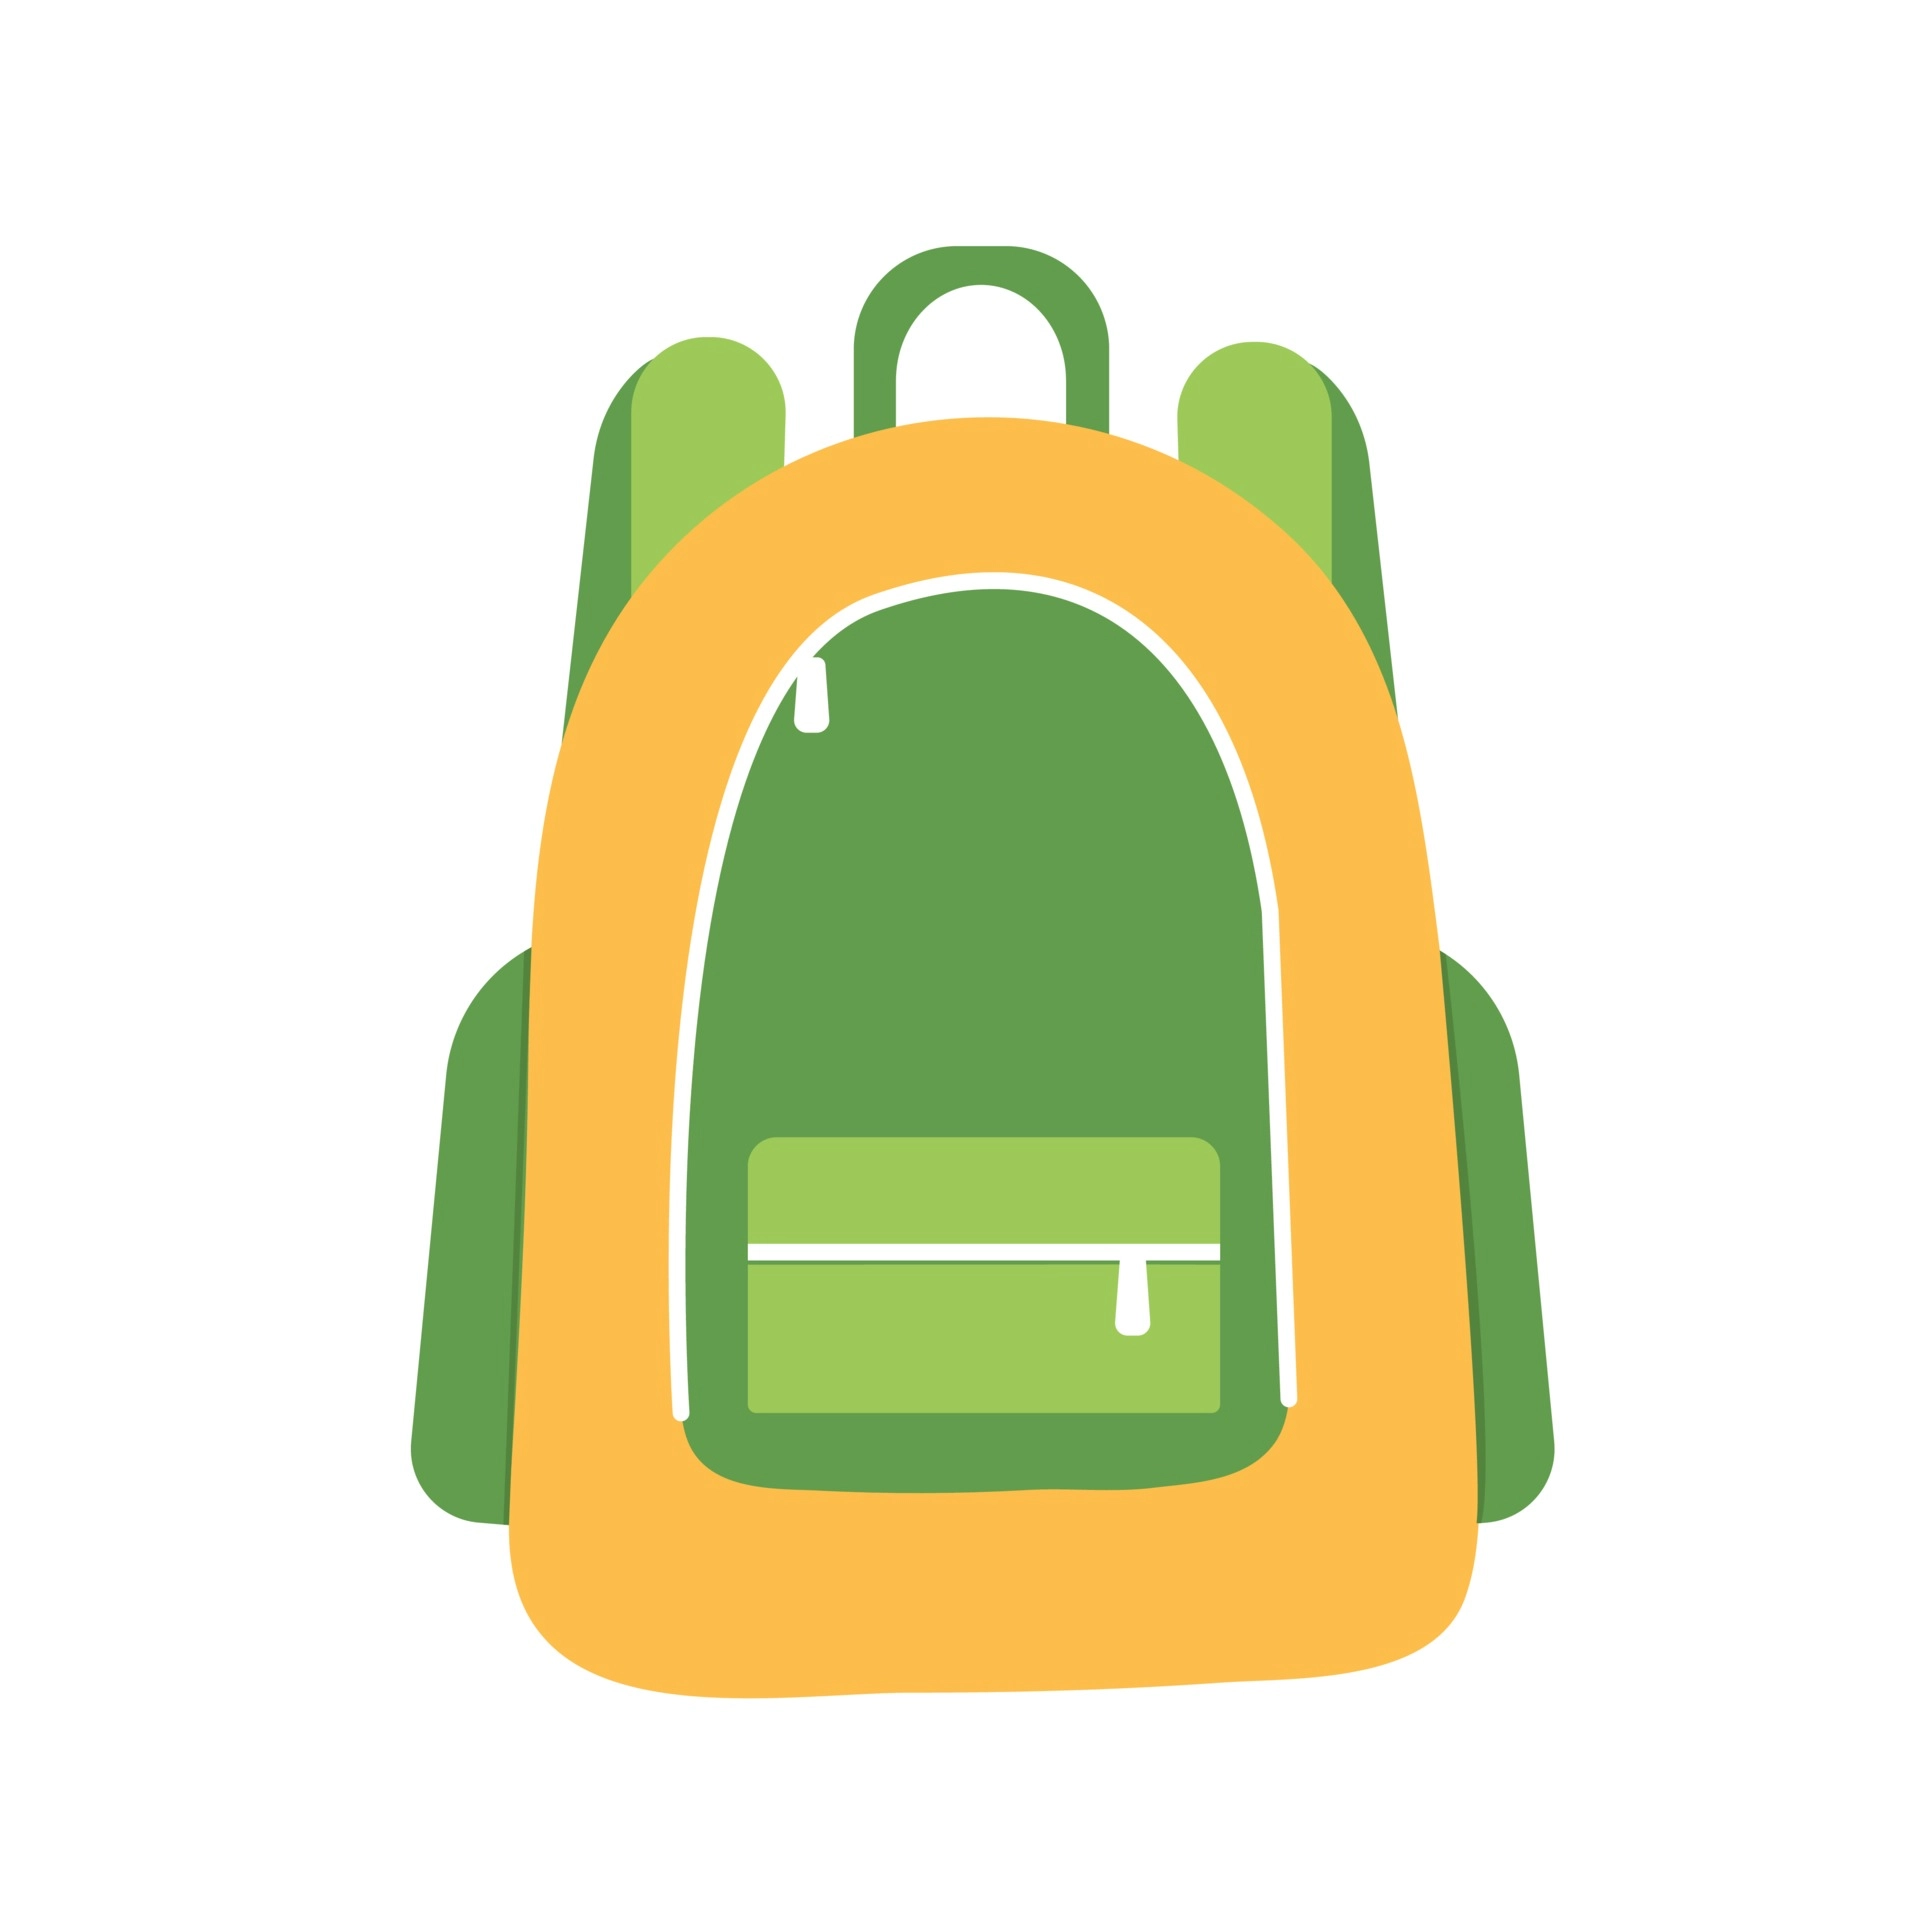 yellow green sports backpack for travel comfortable shoulder bag icons in flat style on a white background vector